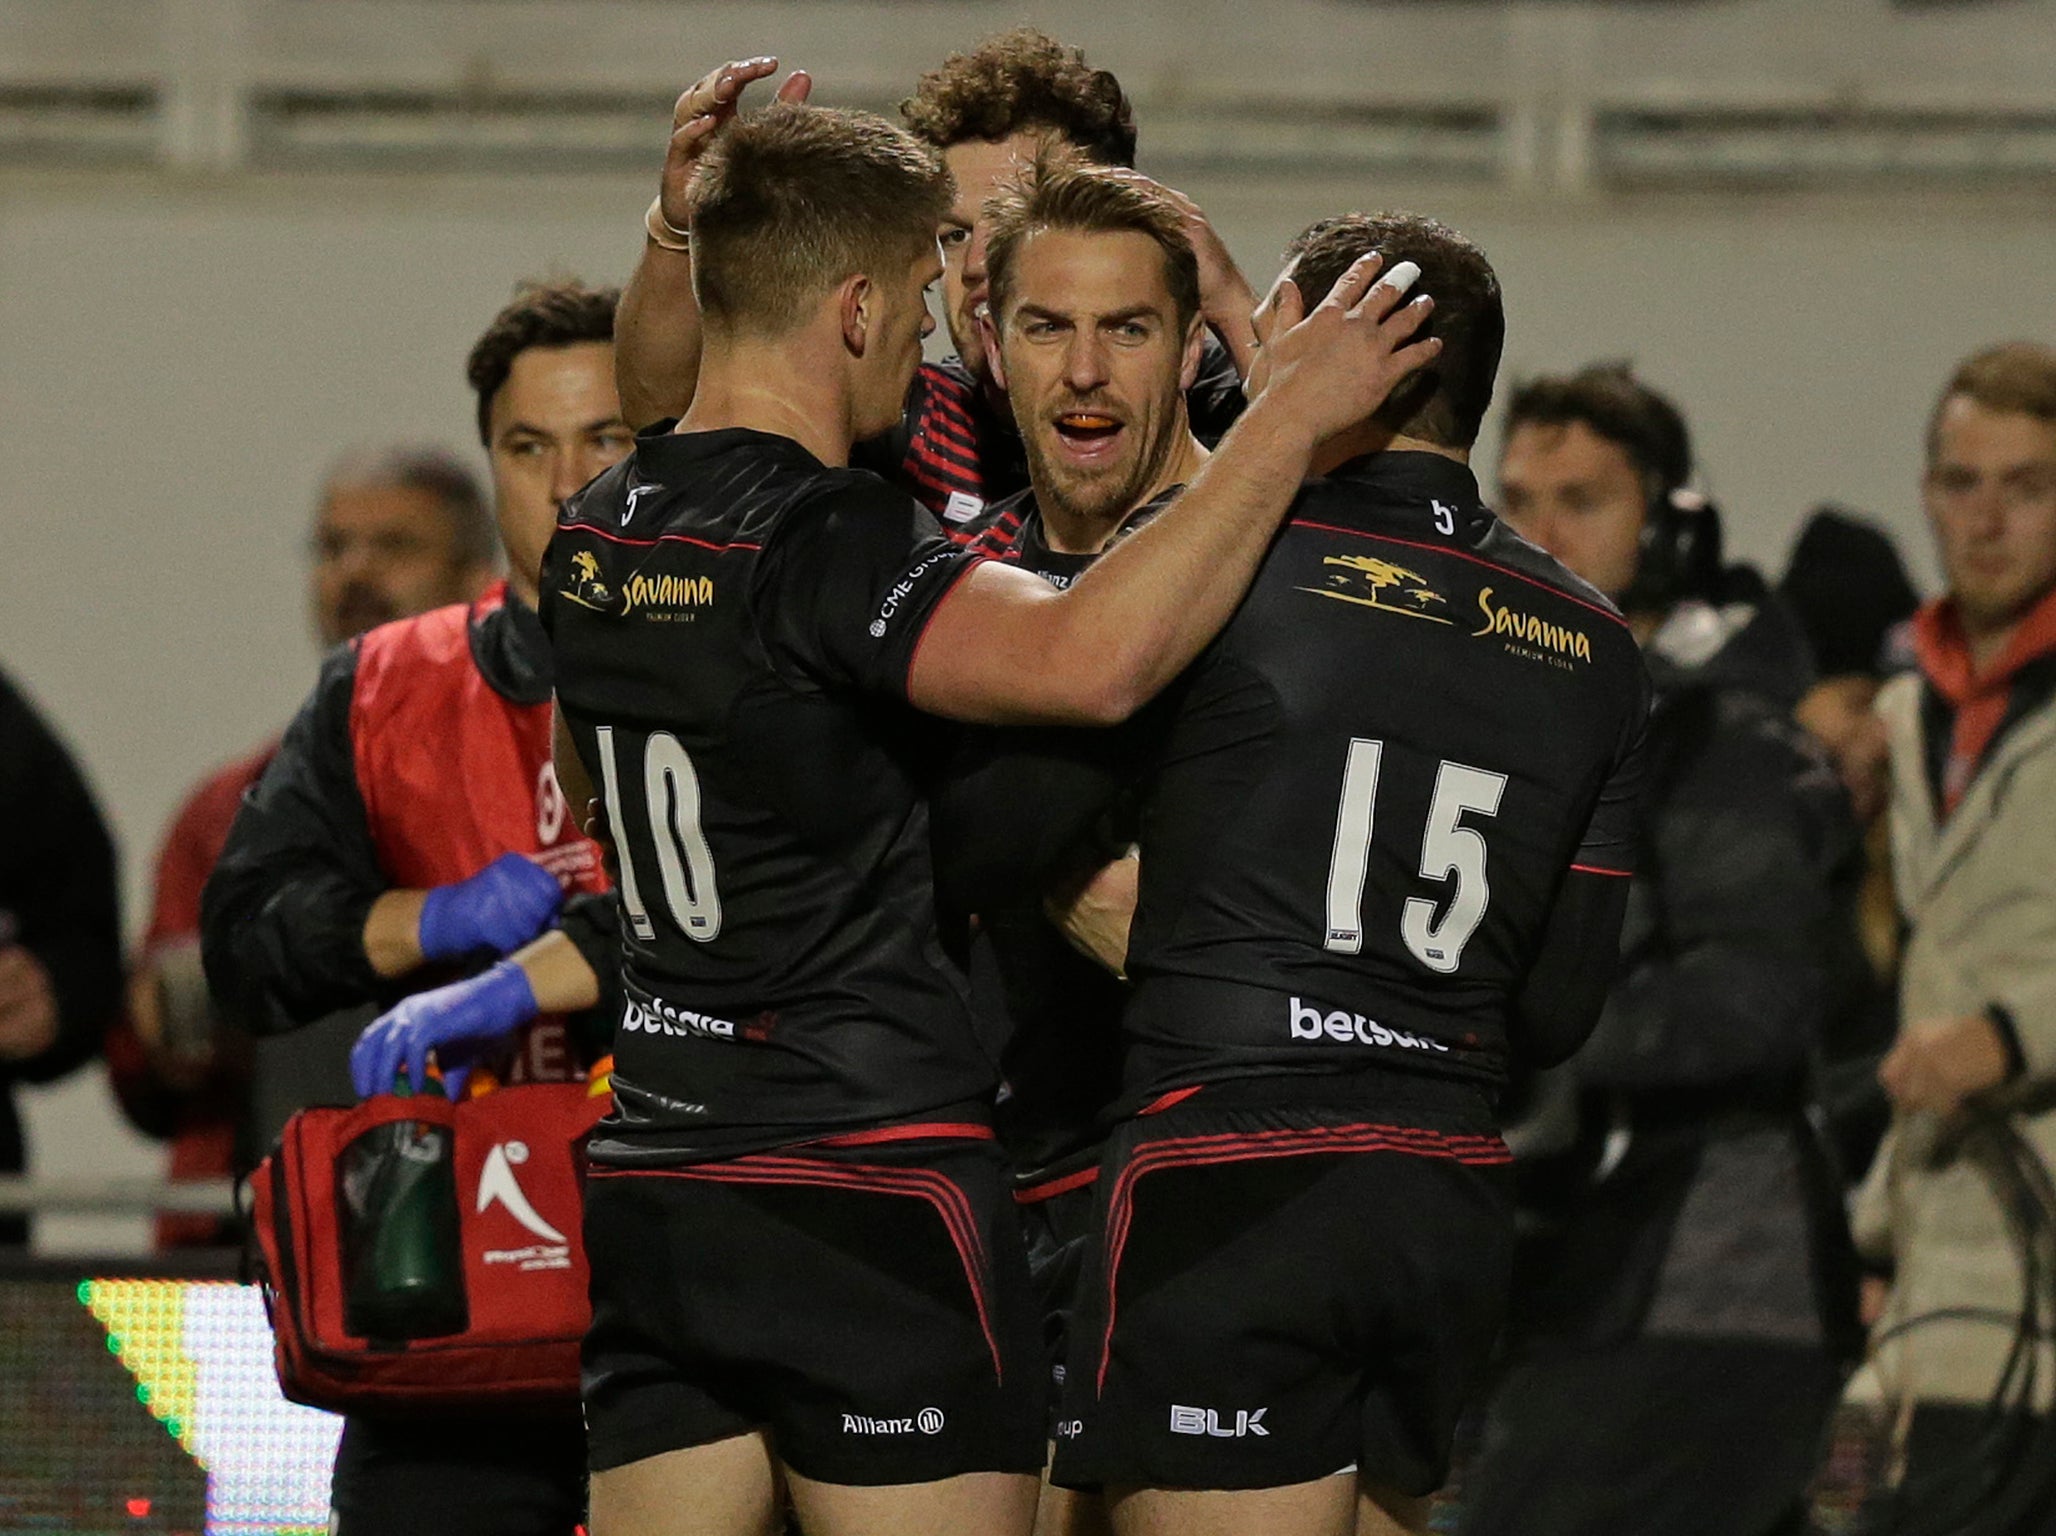 Saracens recorded their 20th unbeaten match in the Champions Cup with a 36-34 win over Ospreys